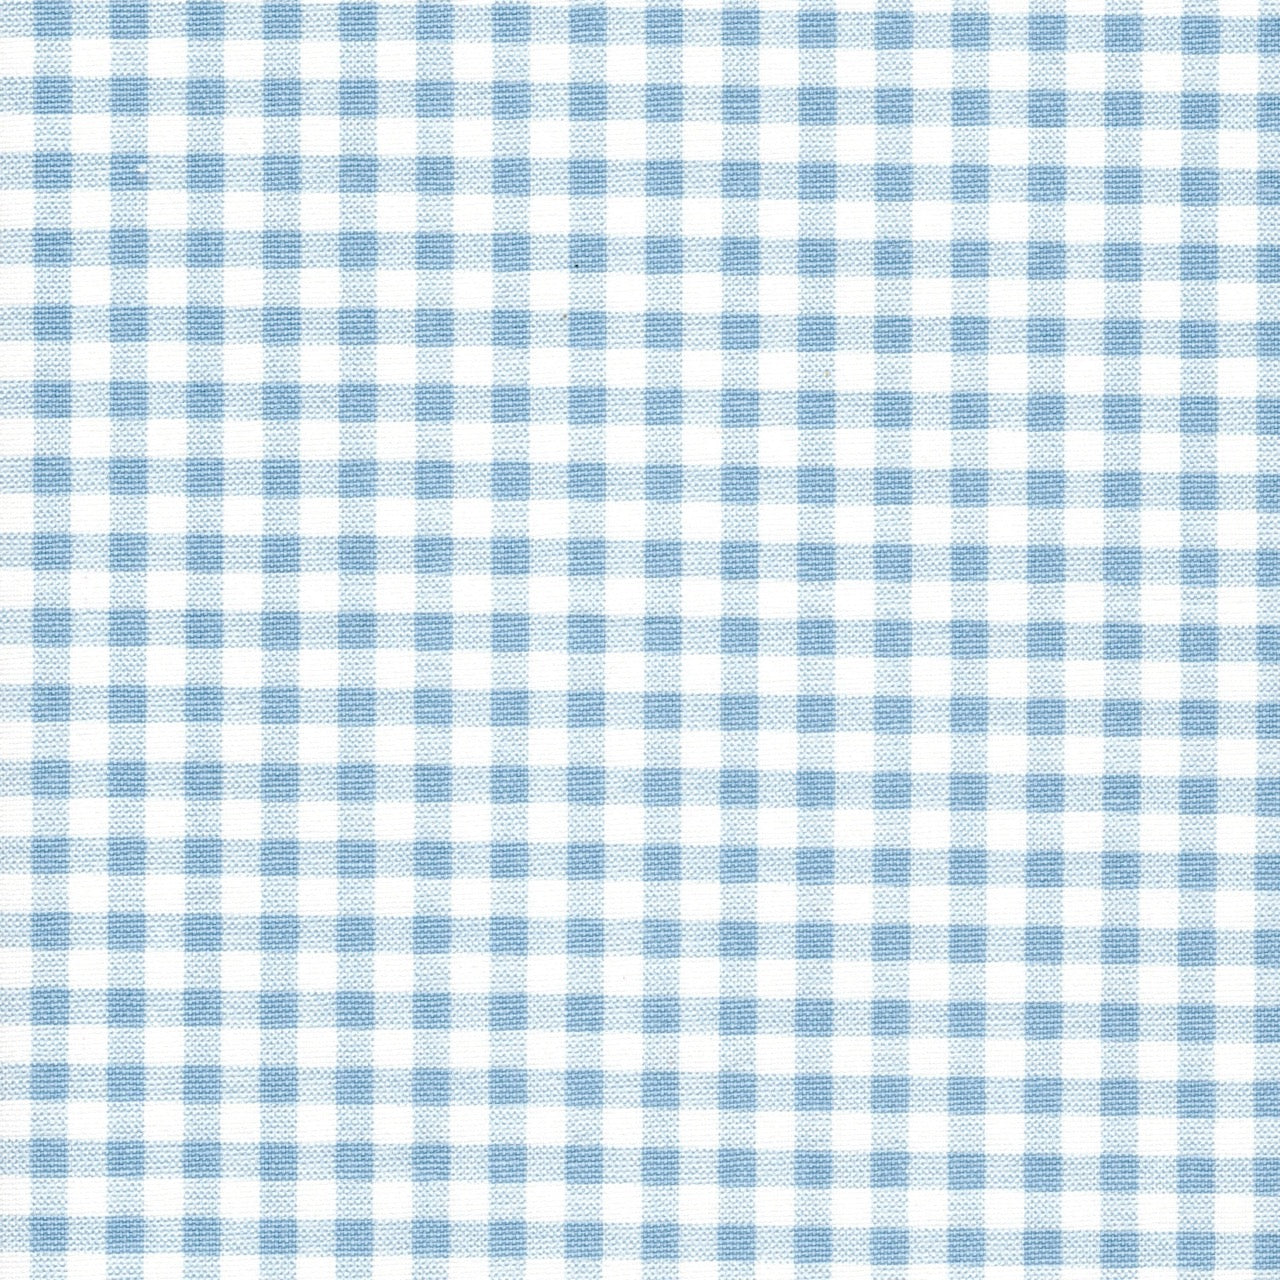 Gathered Crib Skirt in Weathered Blue Large Gingham Check on White Plaid